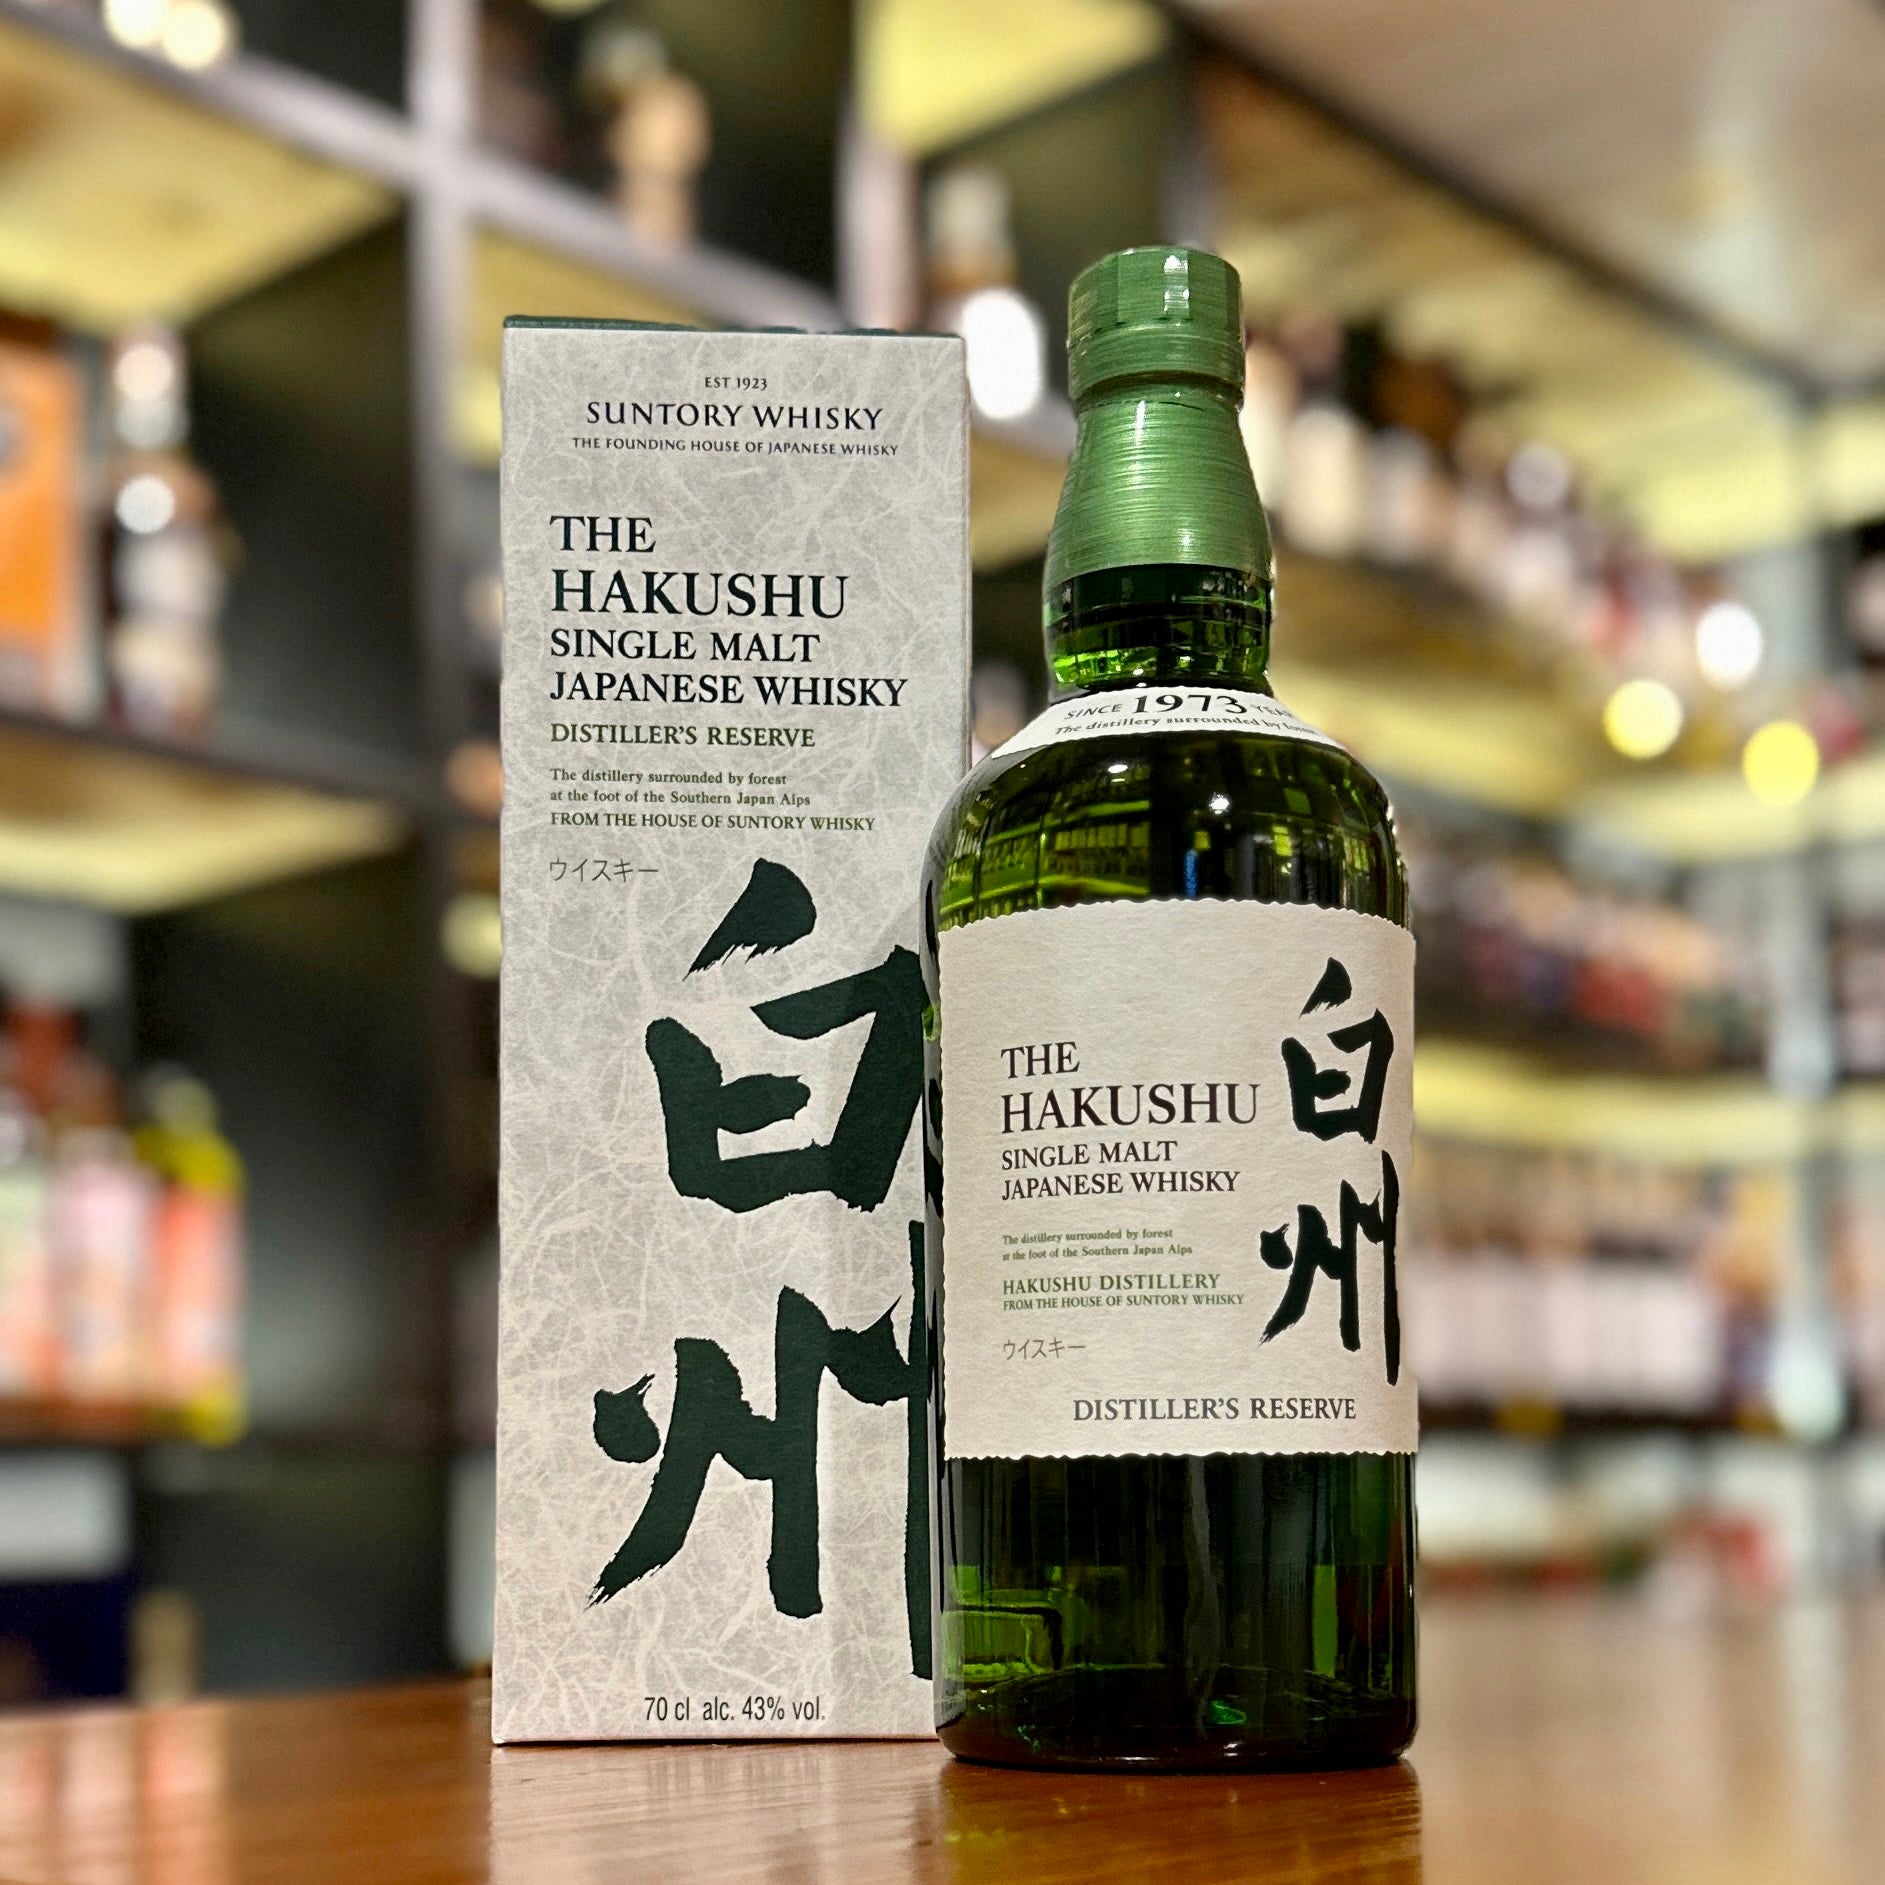 Hakushu – The Central Whisky